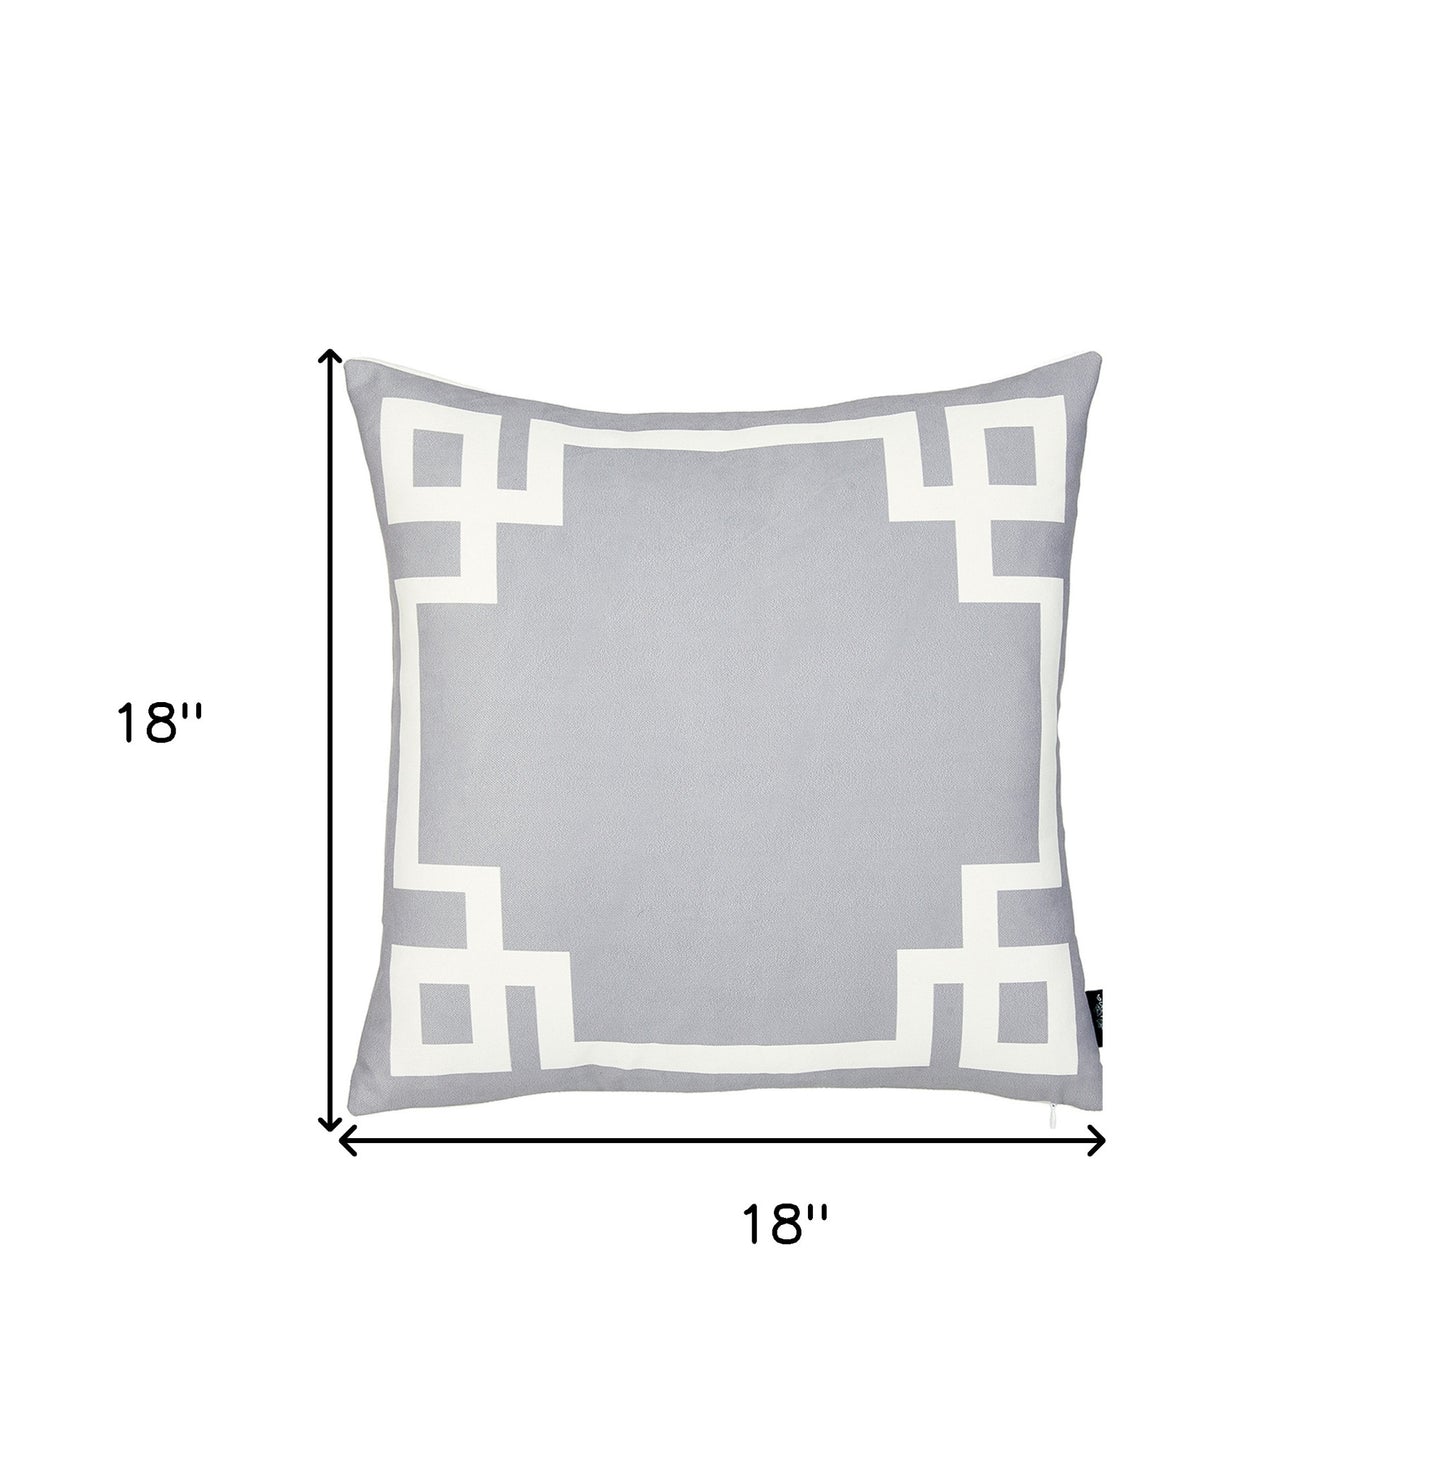 18" Light Grey And White Geometric Decorative Throw Pillow Cover